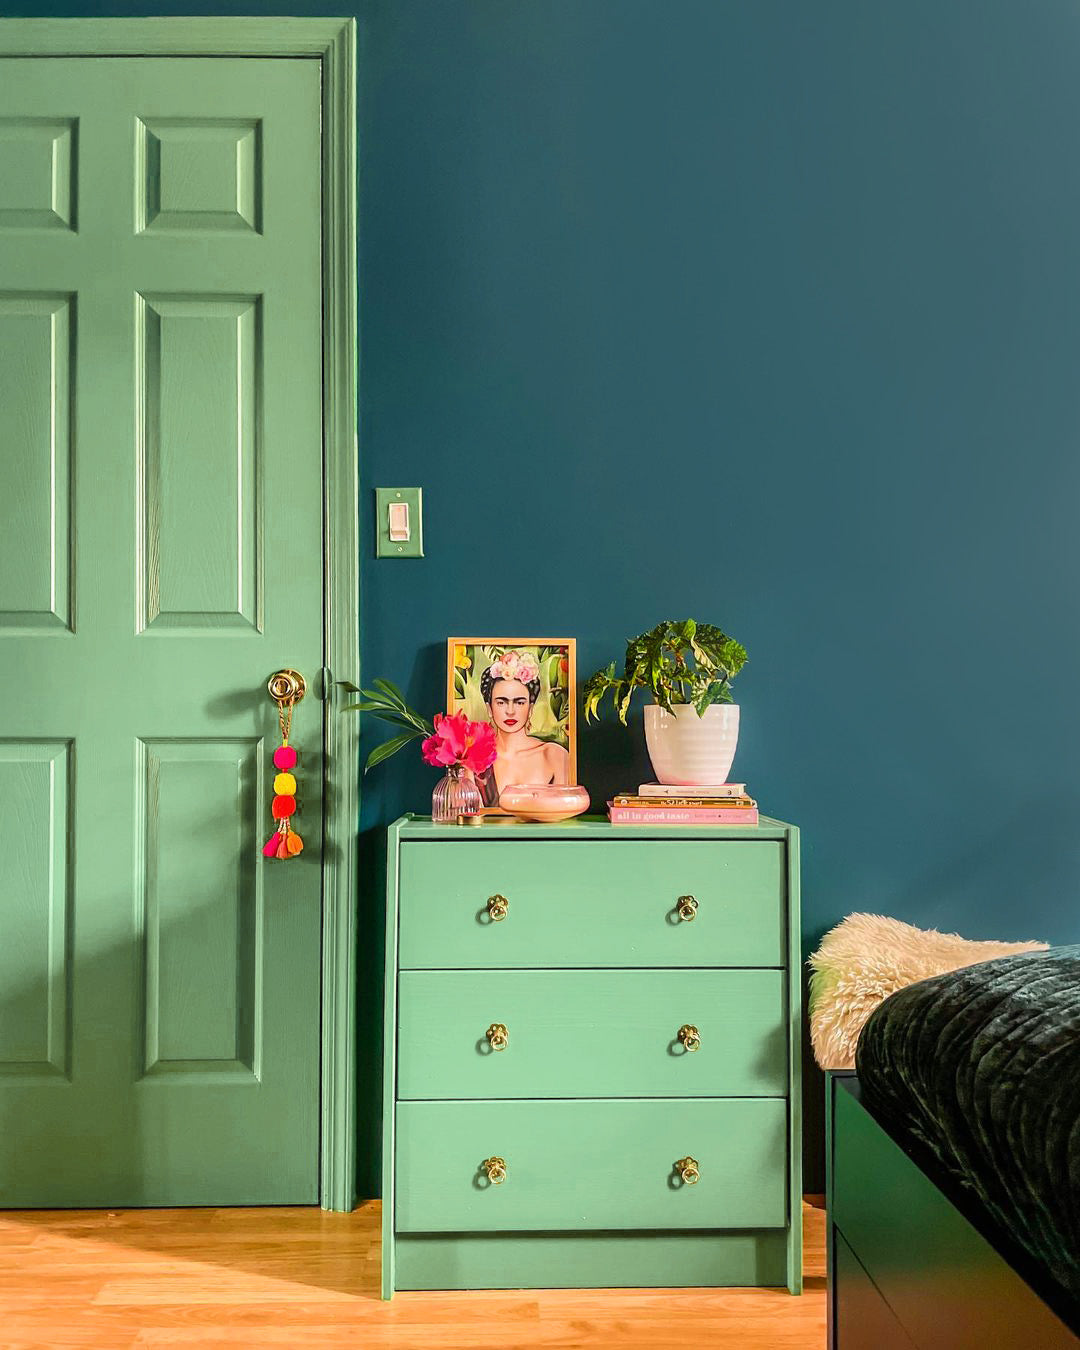 Creative paint ideas to inspire your next paint project. This dresser and trim are painted in Clare Matcha Latte with Walls painted in the blue paint color Deep Dive. 